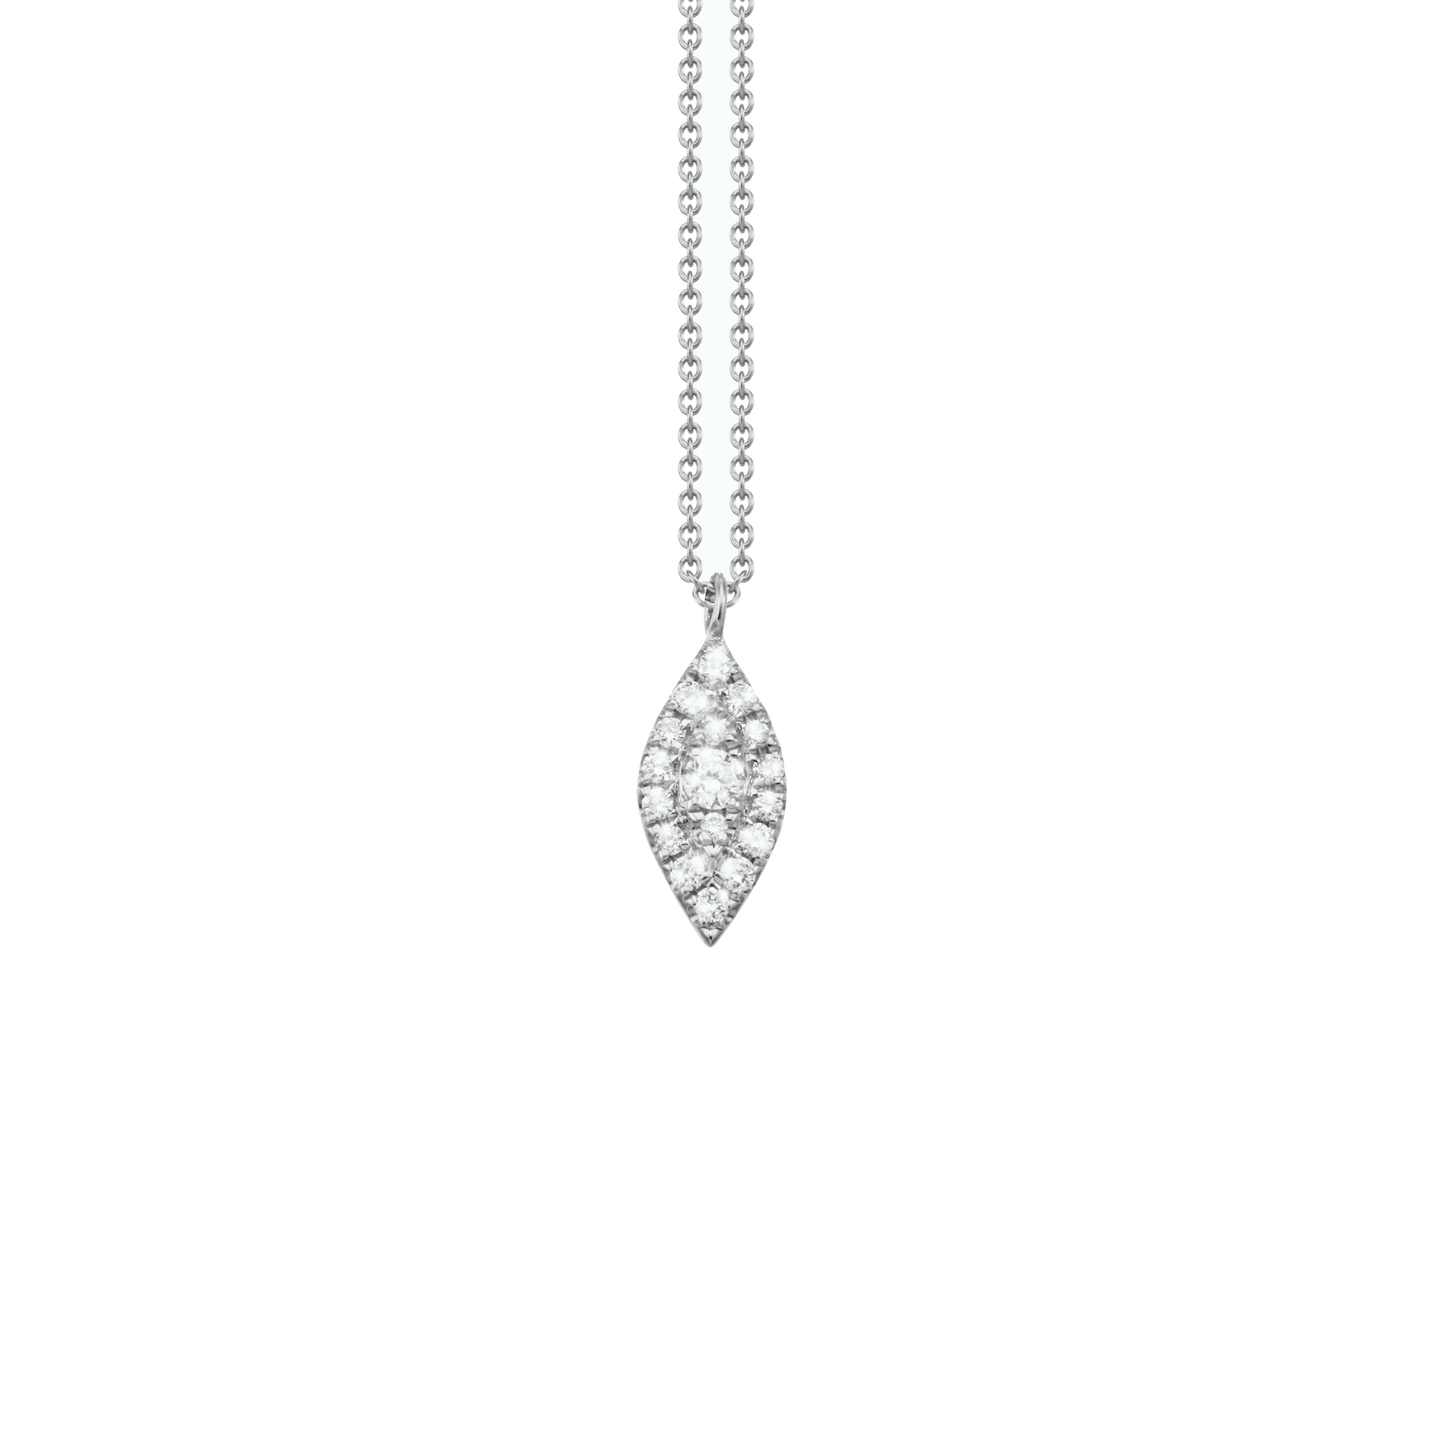 Oliver Heemeyer Mia diamond pendant made of 18k white gold crafted with a larger centered diamond surrounded by 17 smaller diamonds.